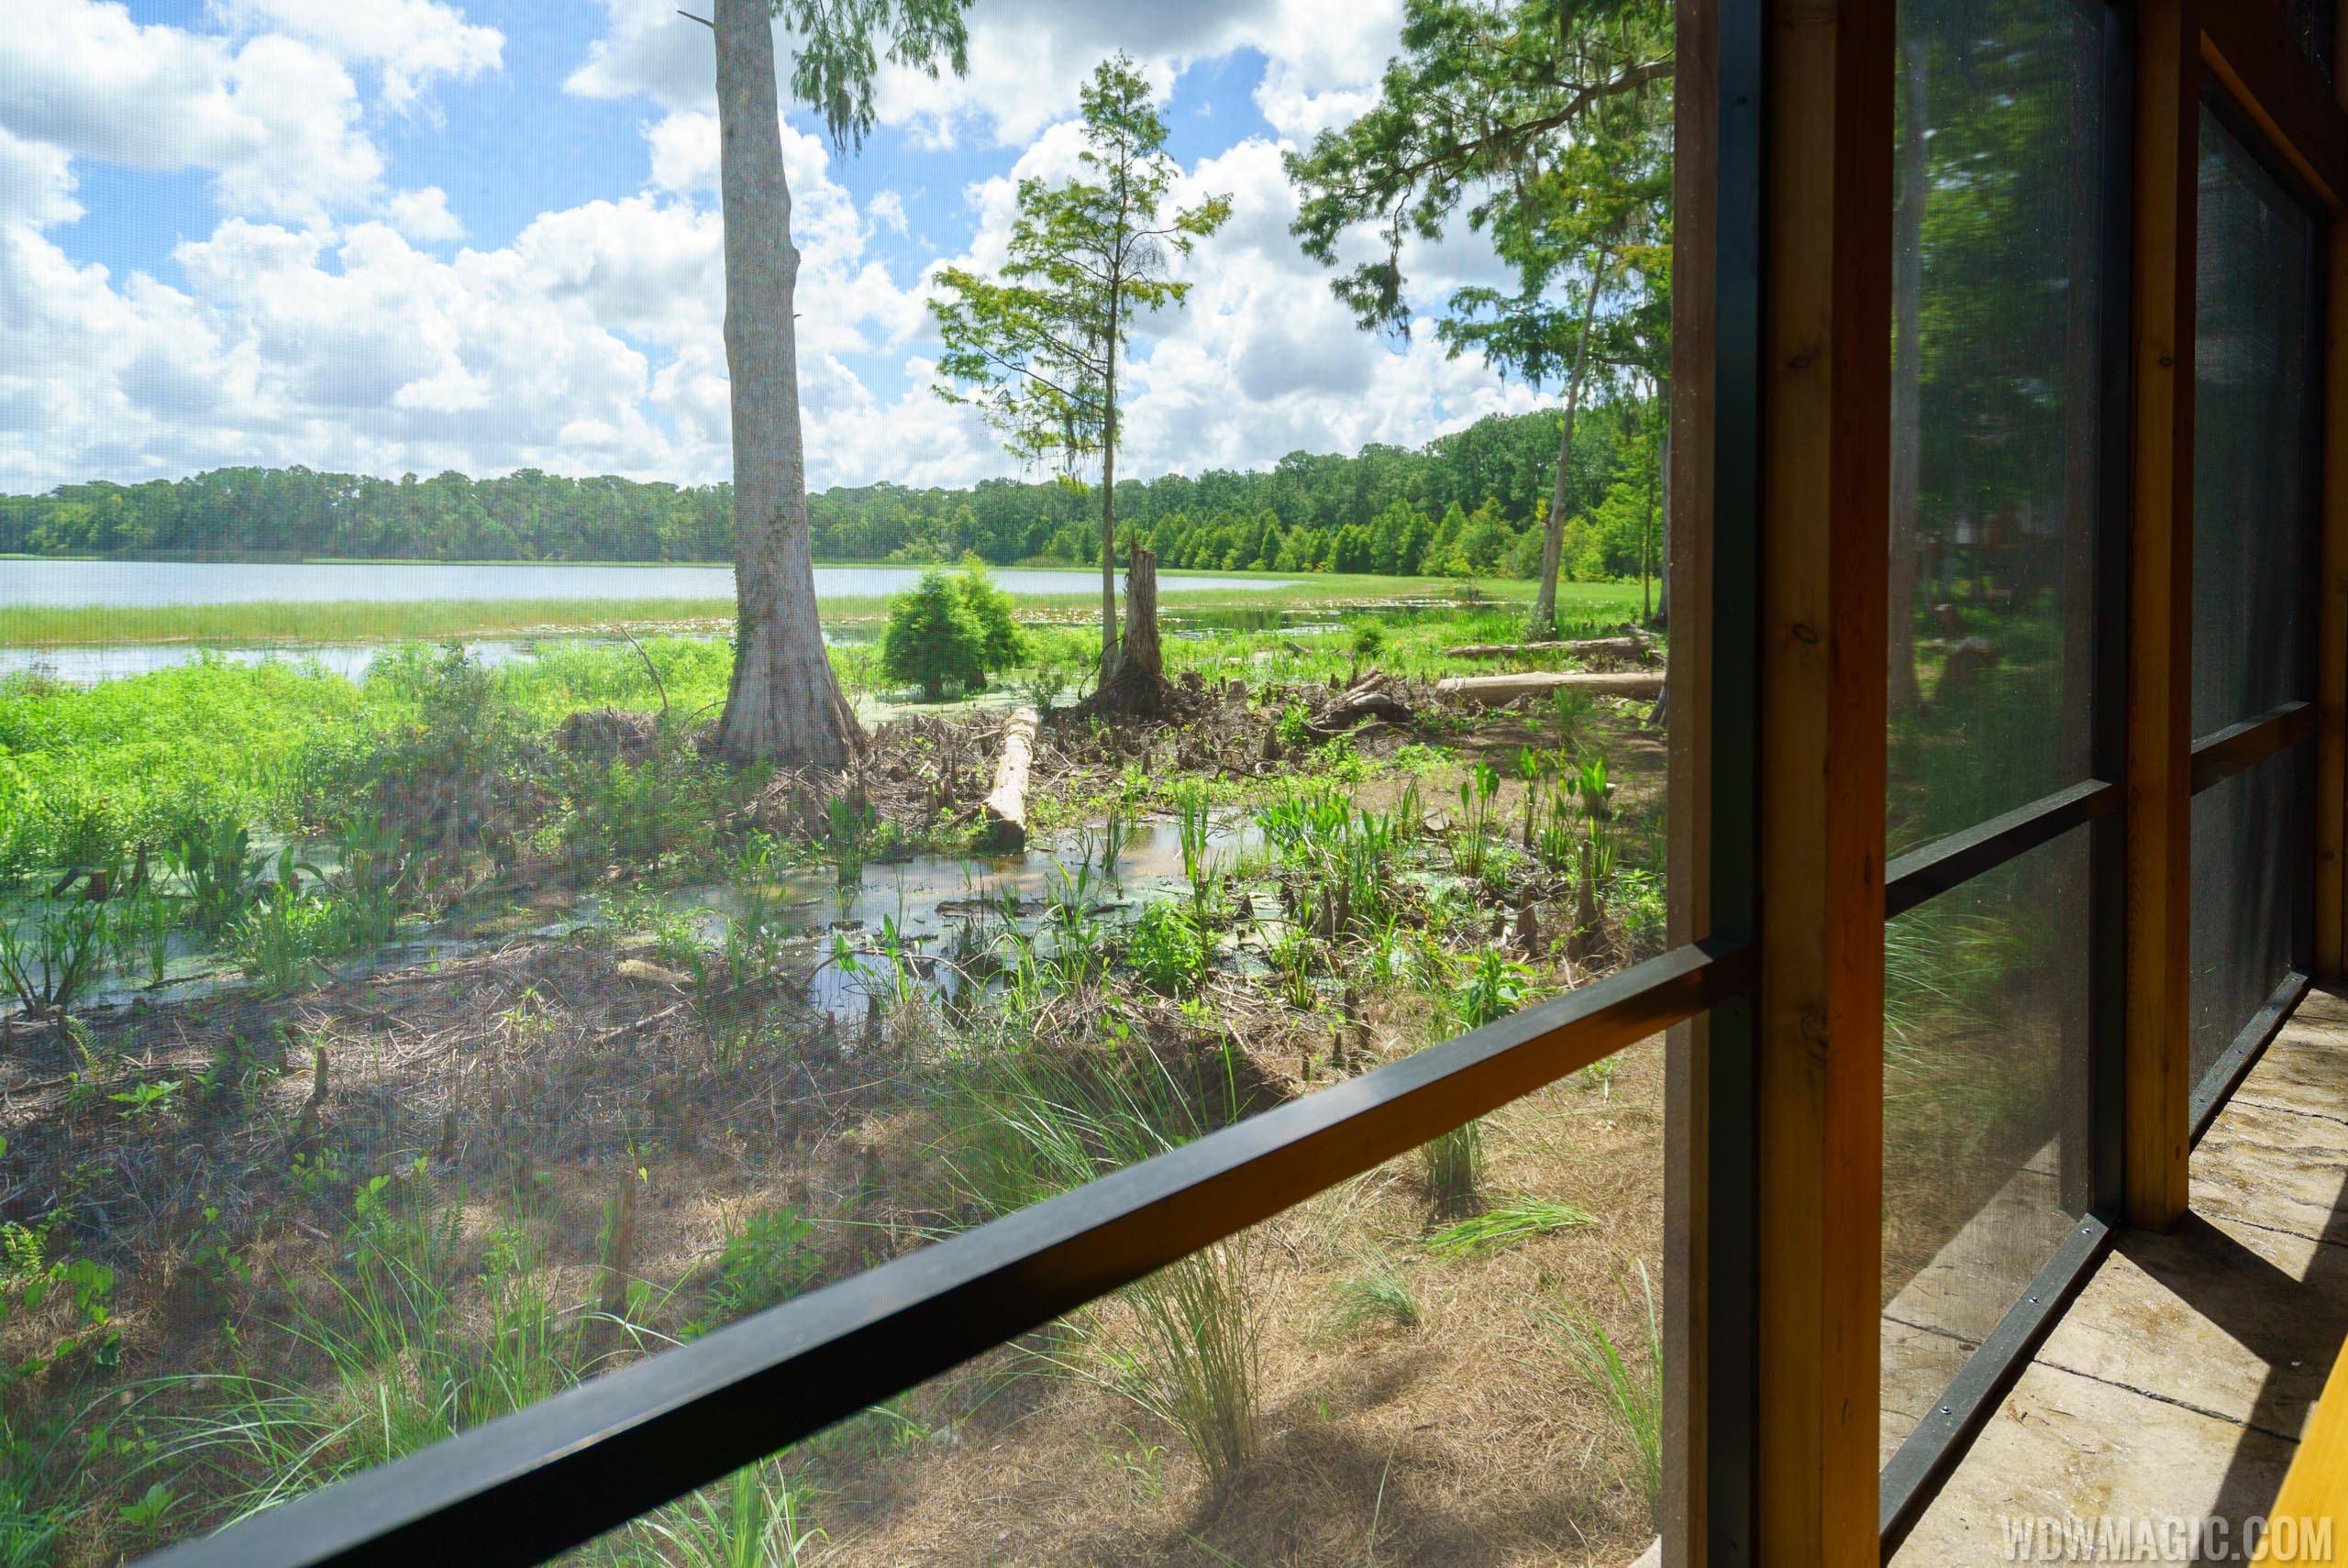 Copper Creek Villas and Cabins at Disney's Wilderness Lodge - View onto Bay Lake from the Cabin Hot Tub